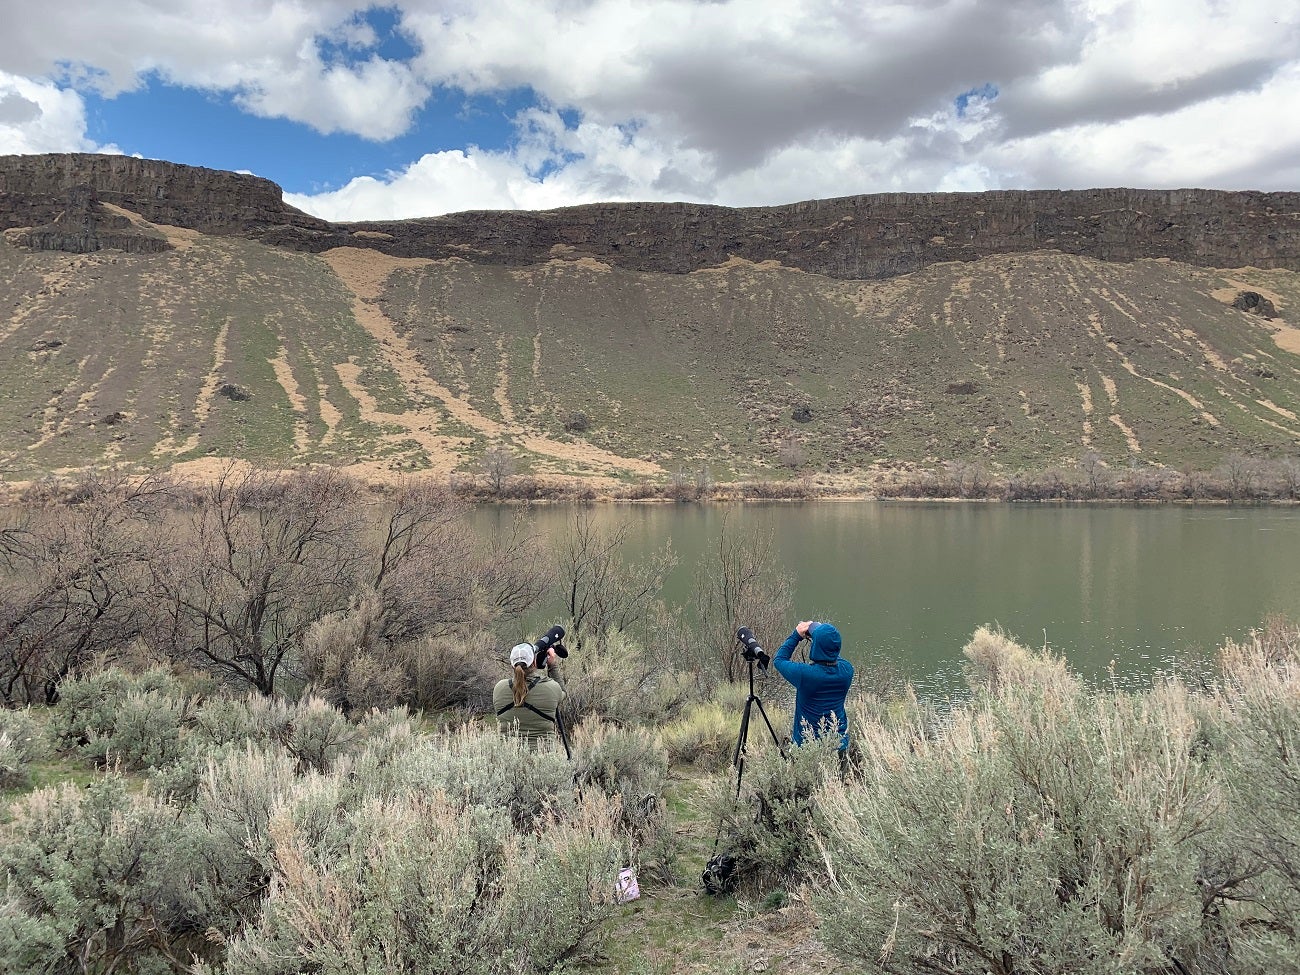 Biologists Christina Hartmann and Chris Roberts monitoring Prairie Falcon territory with spotting scopes and binoculars by the Snake River, NCA